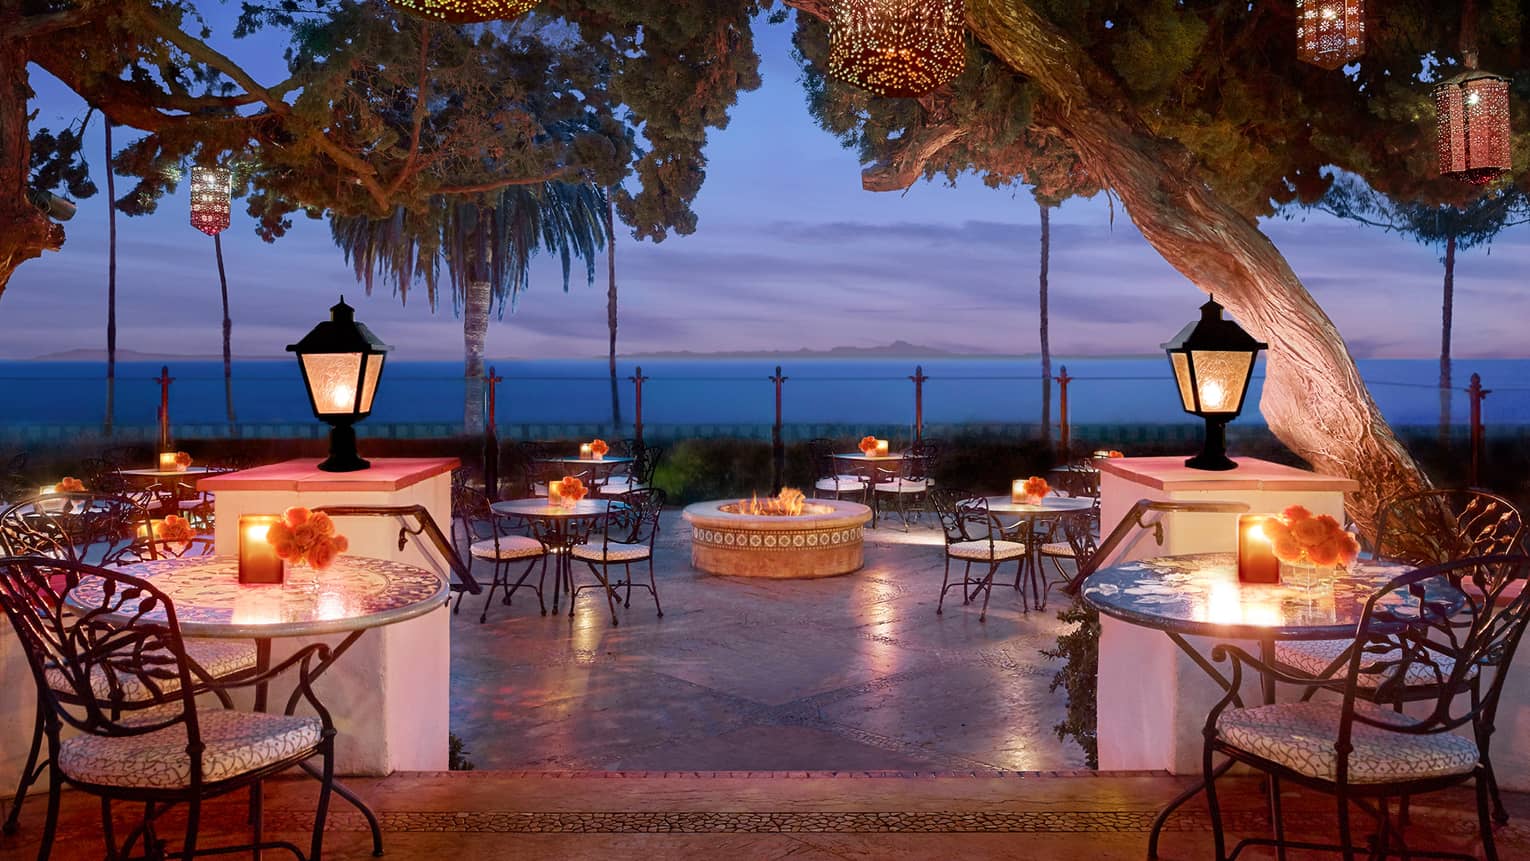 Bella Vista patio at dusk with candle-lit tables under lanterns on posts, hanging from trees